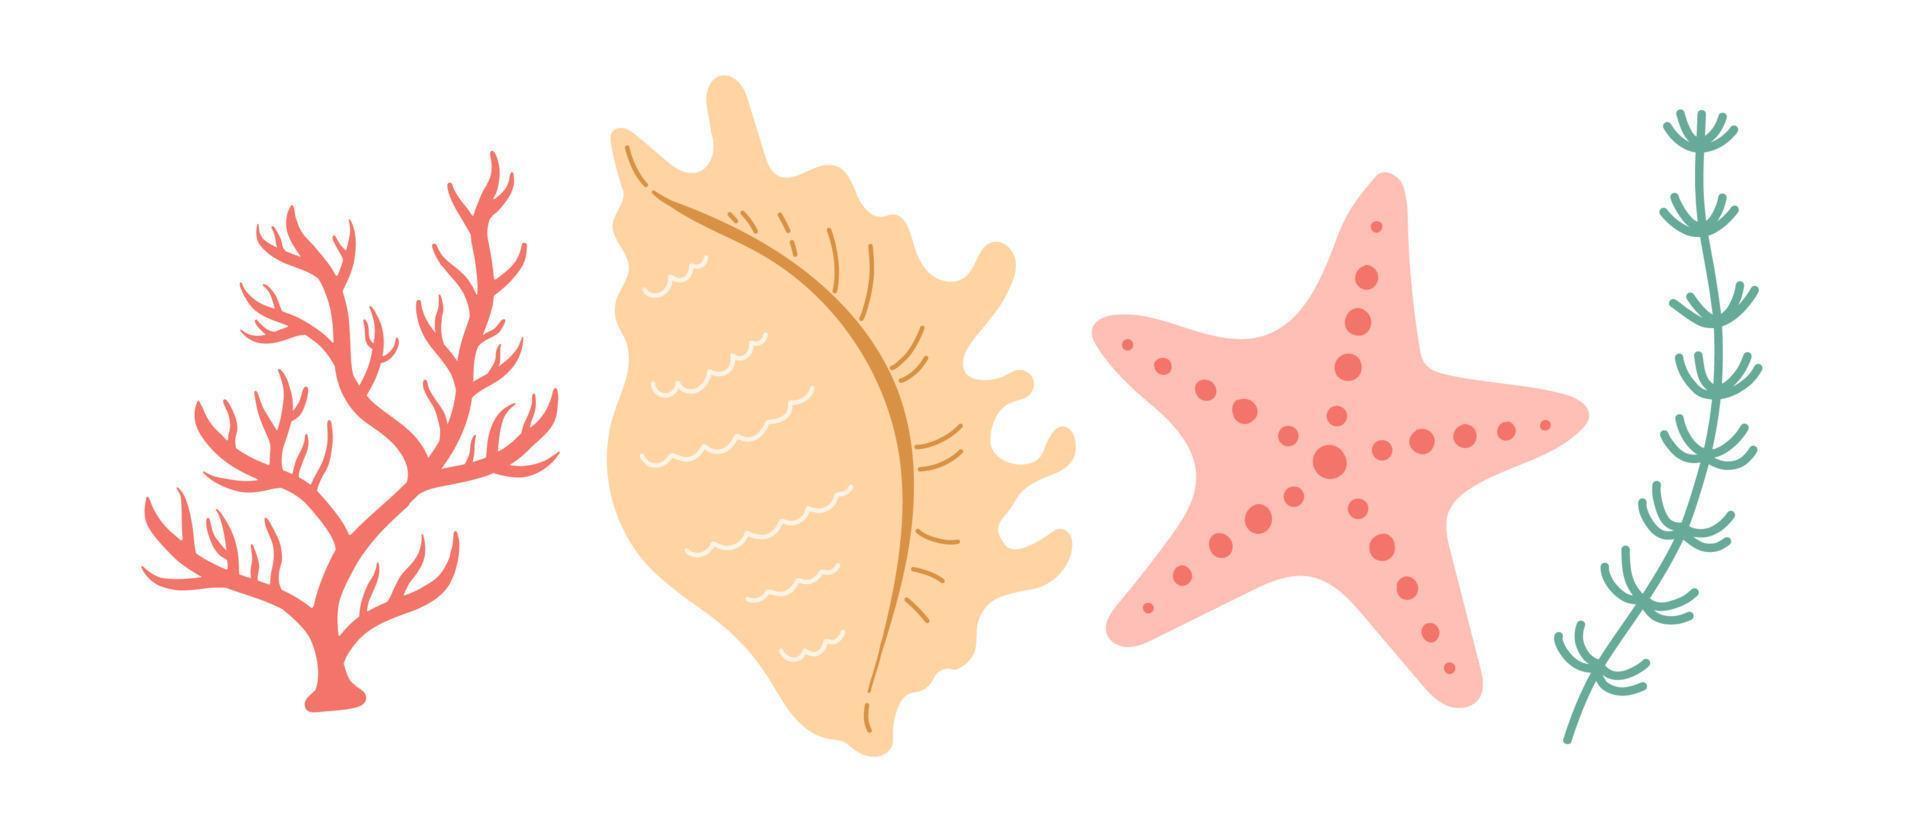 Seashell and coral vector illustration, simple color, flat design